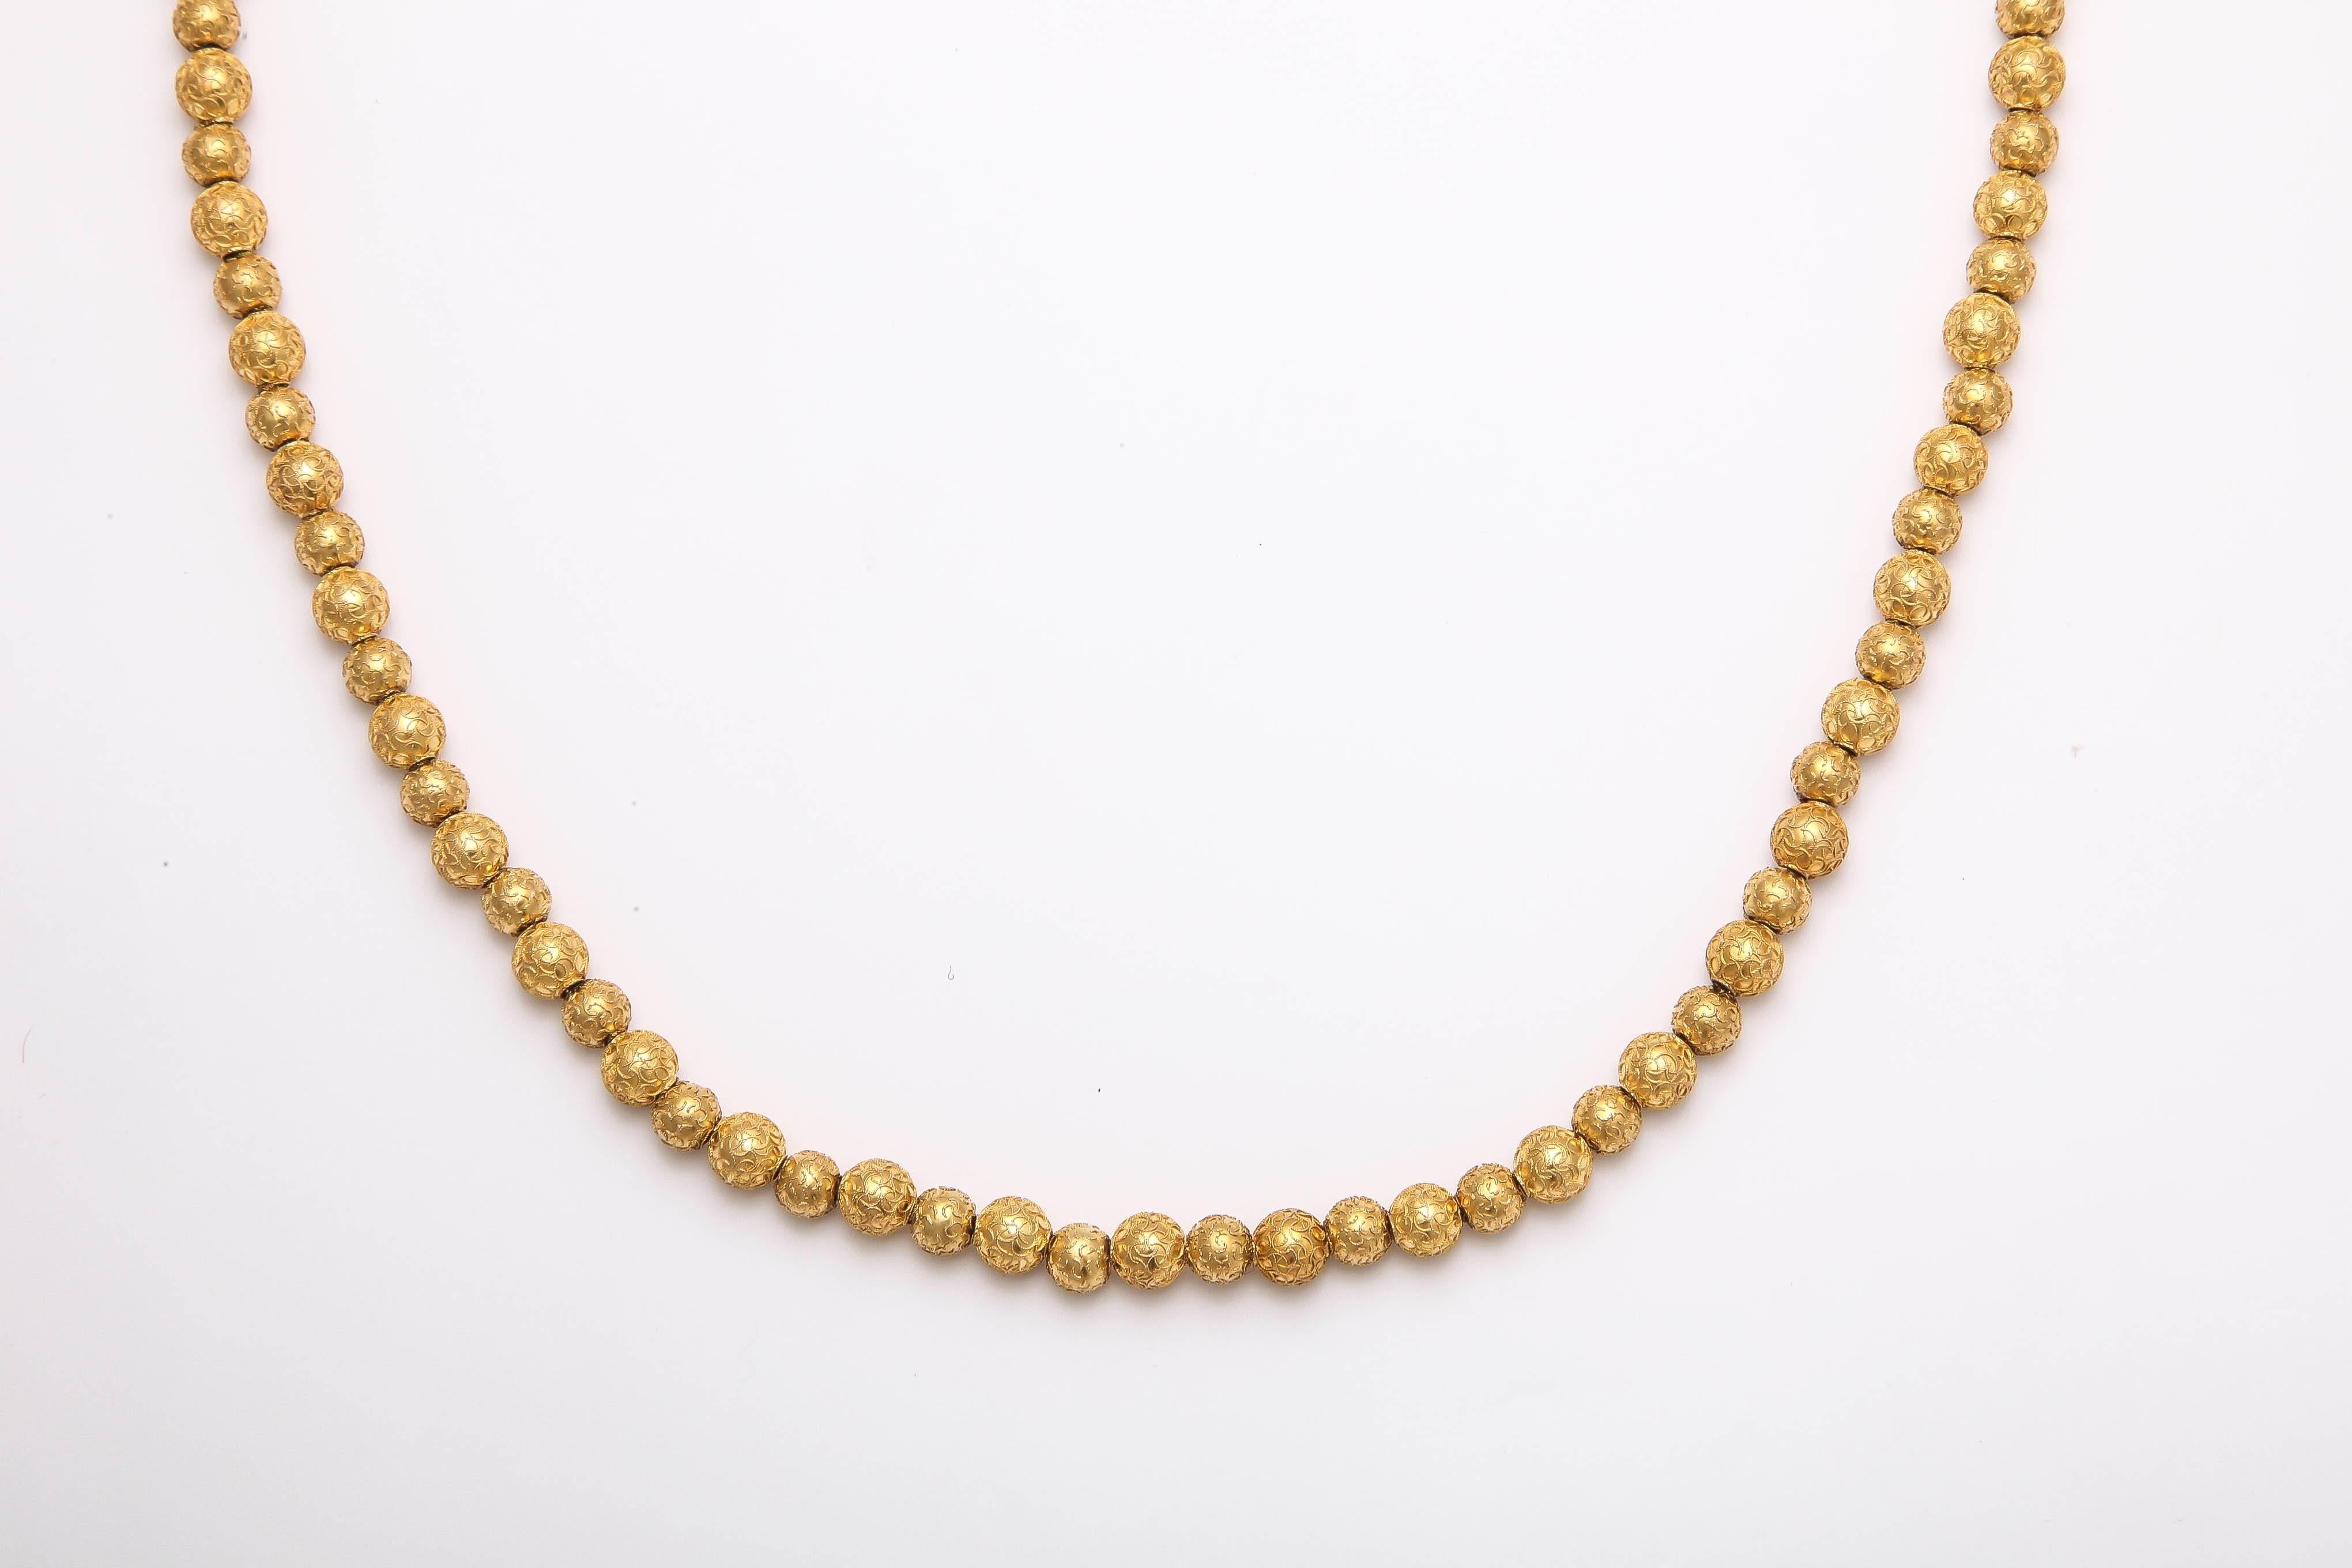 Women's Intricately Engraved Gold Bead Necklace c.1870